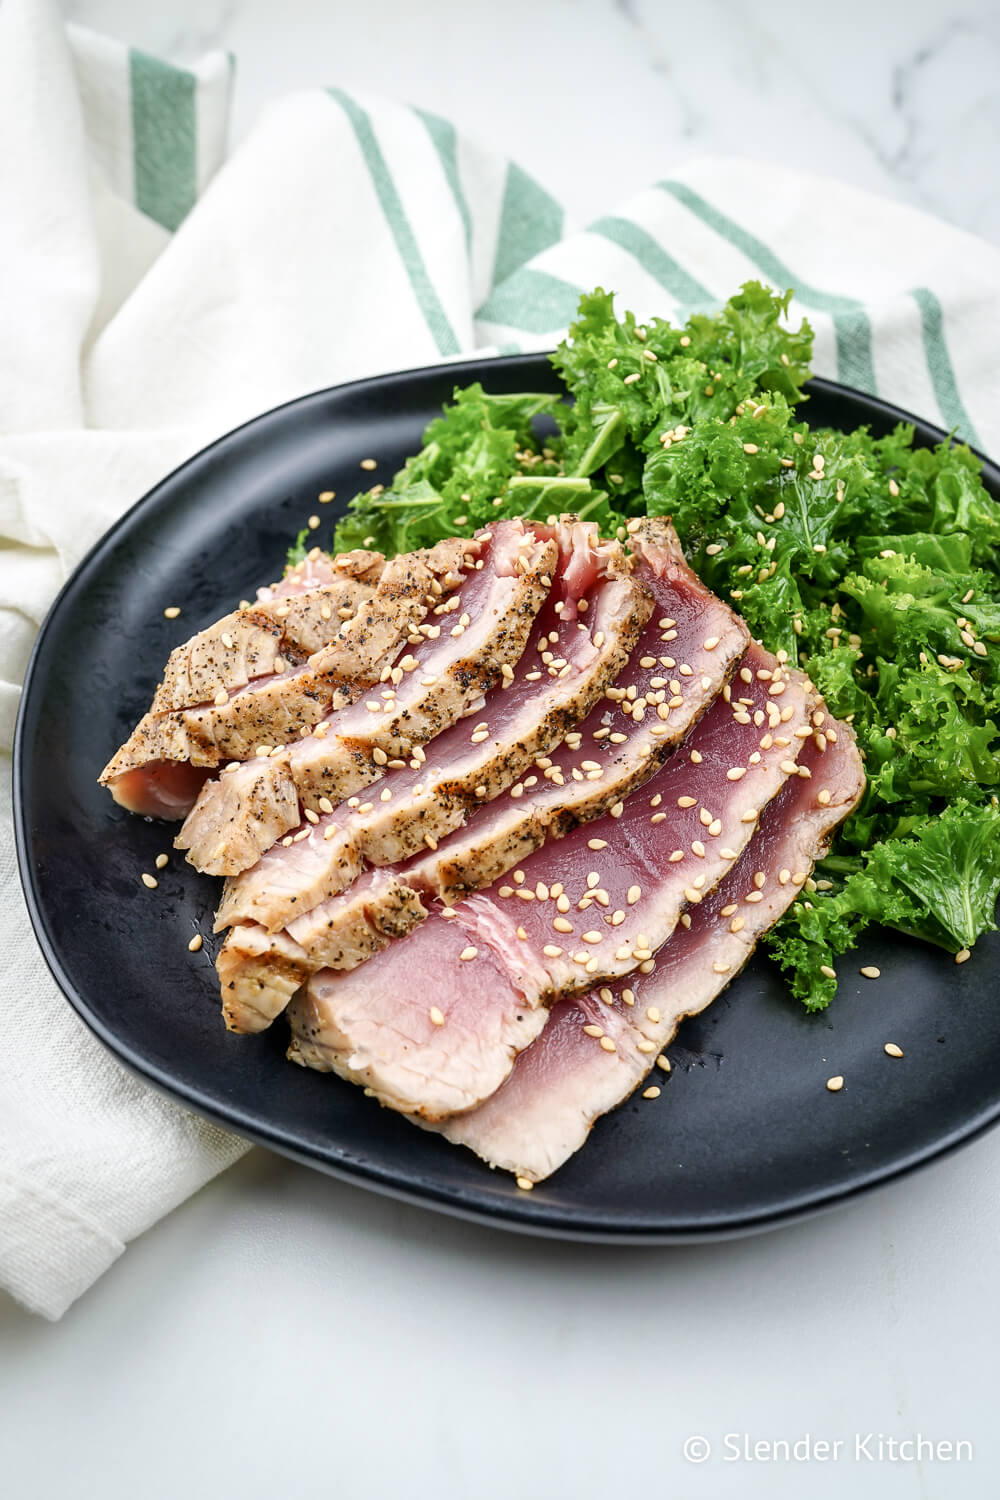 Grilled tuna steak on a black plate with kale salad and a green and white napkin.